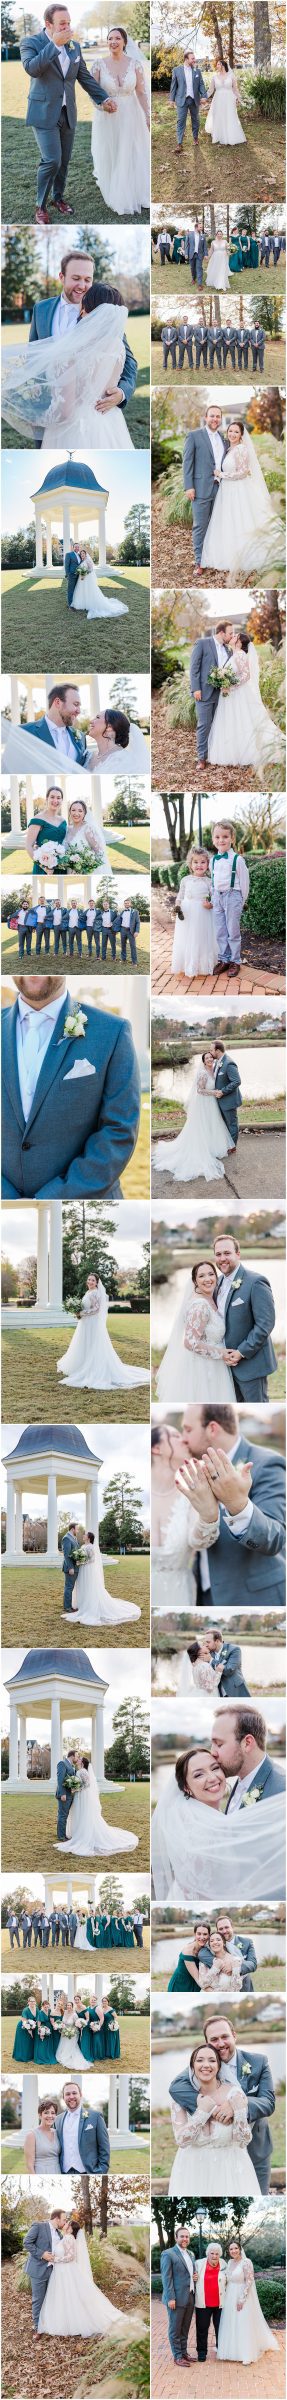 Wedding party portraits outdoors in fall foliage at Ford's Colony Country Club in Williamsburg